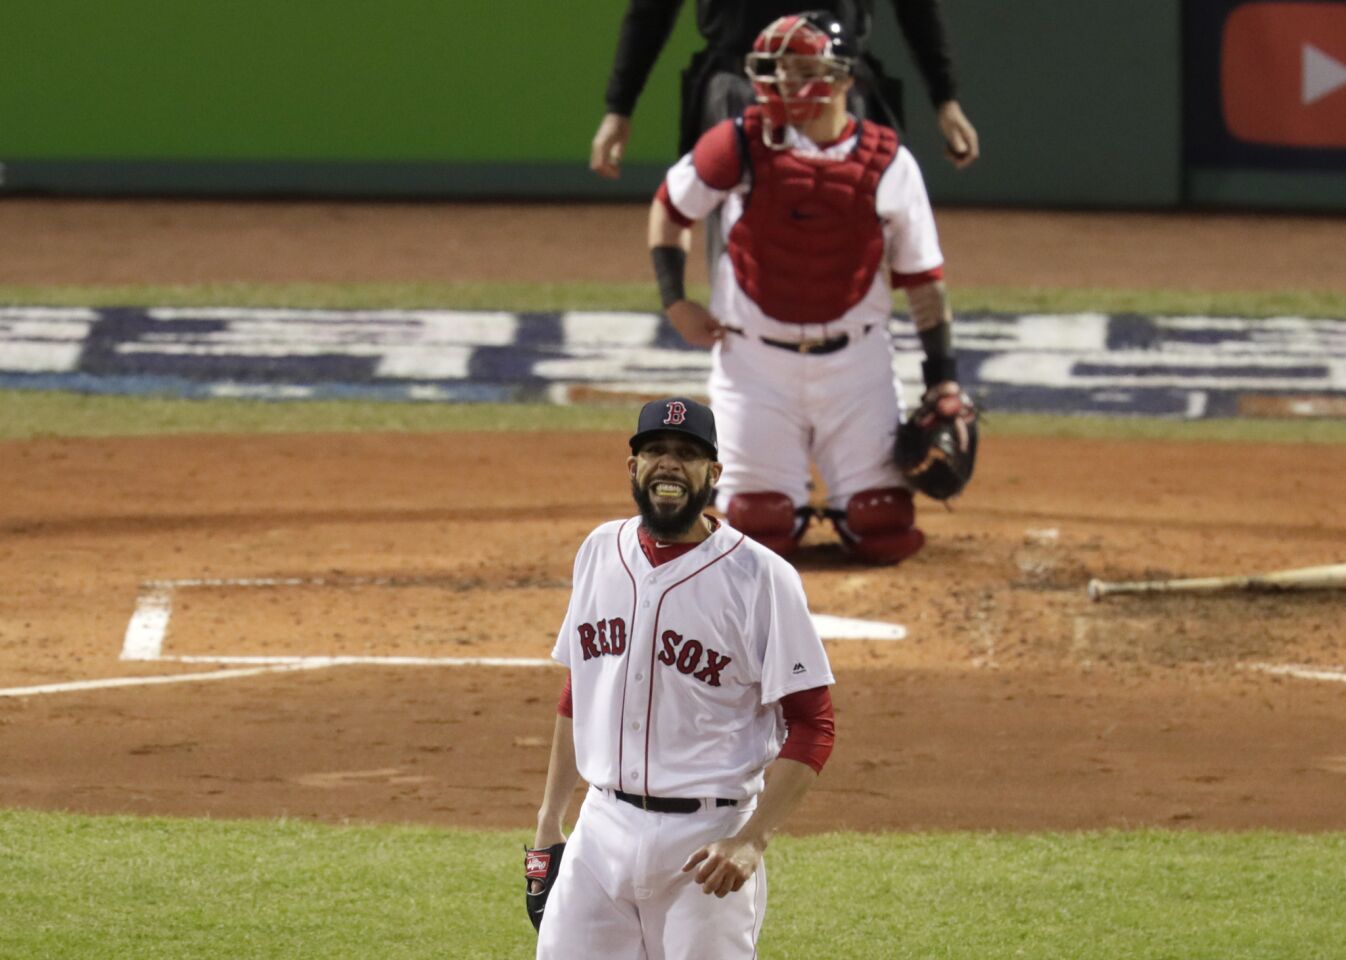 Red Sox pitcher David Price grimaces as a run is scored on a Matt Kemp sacrifice fly to tie the game in the fourth inning.